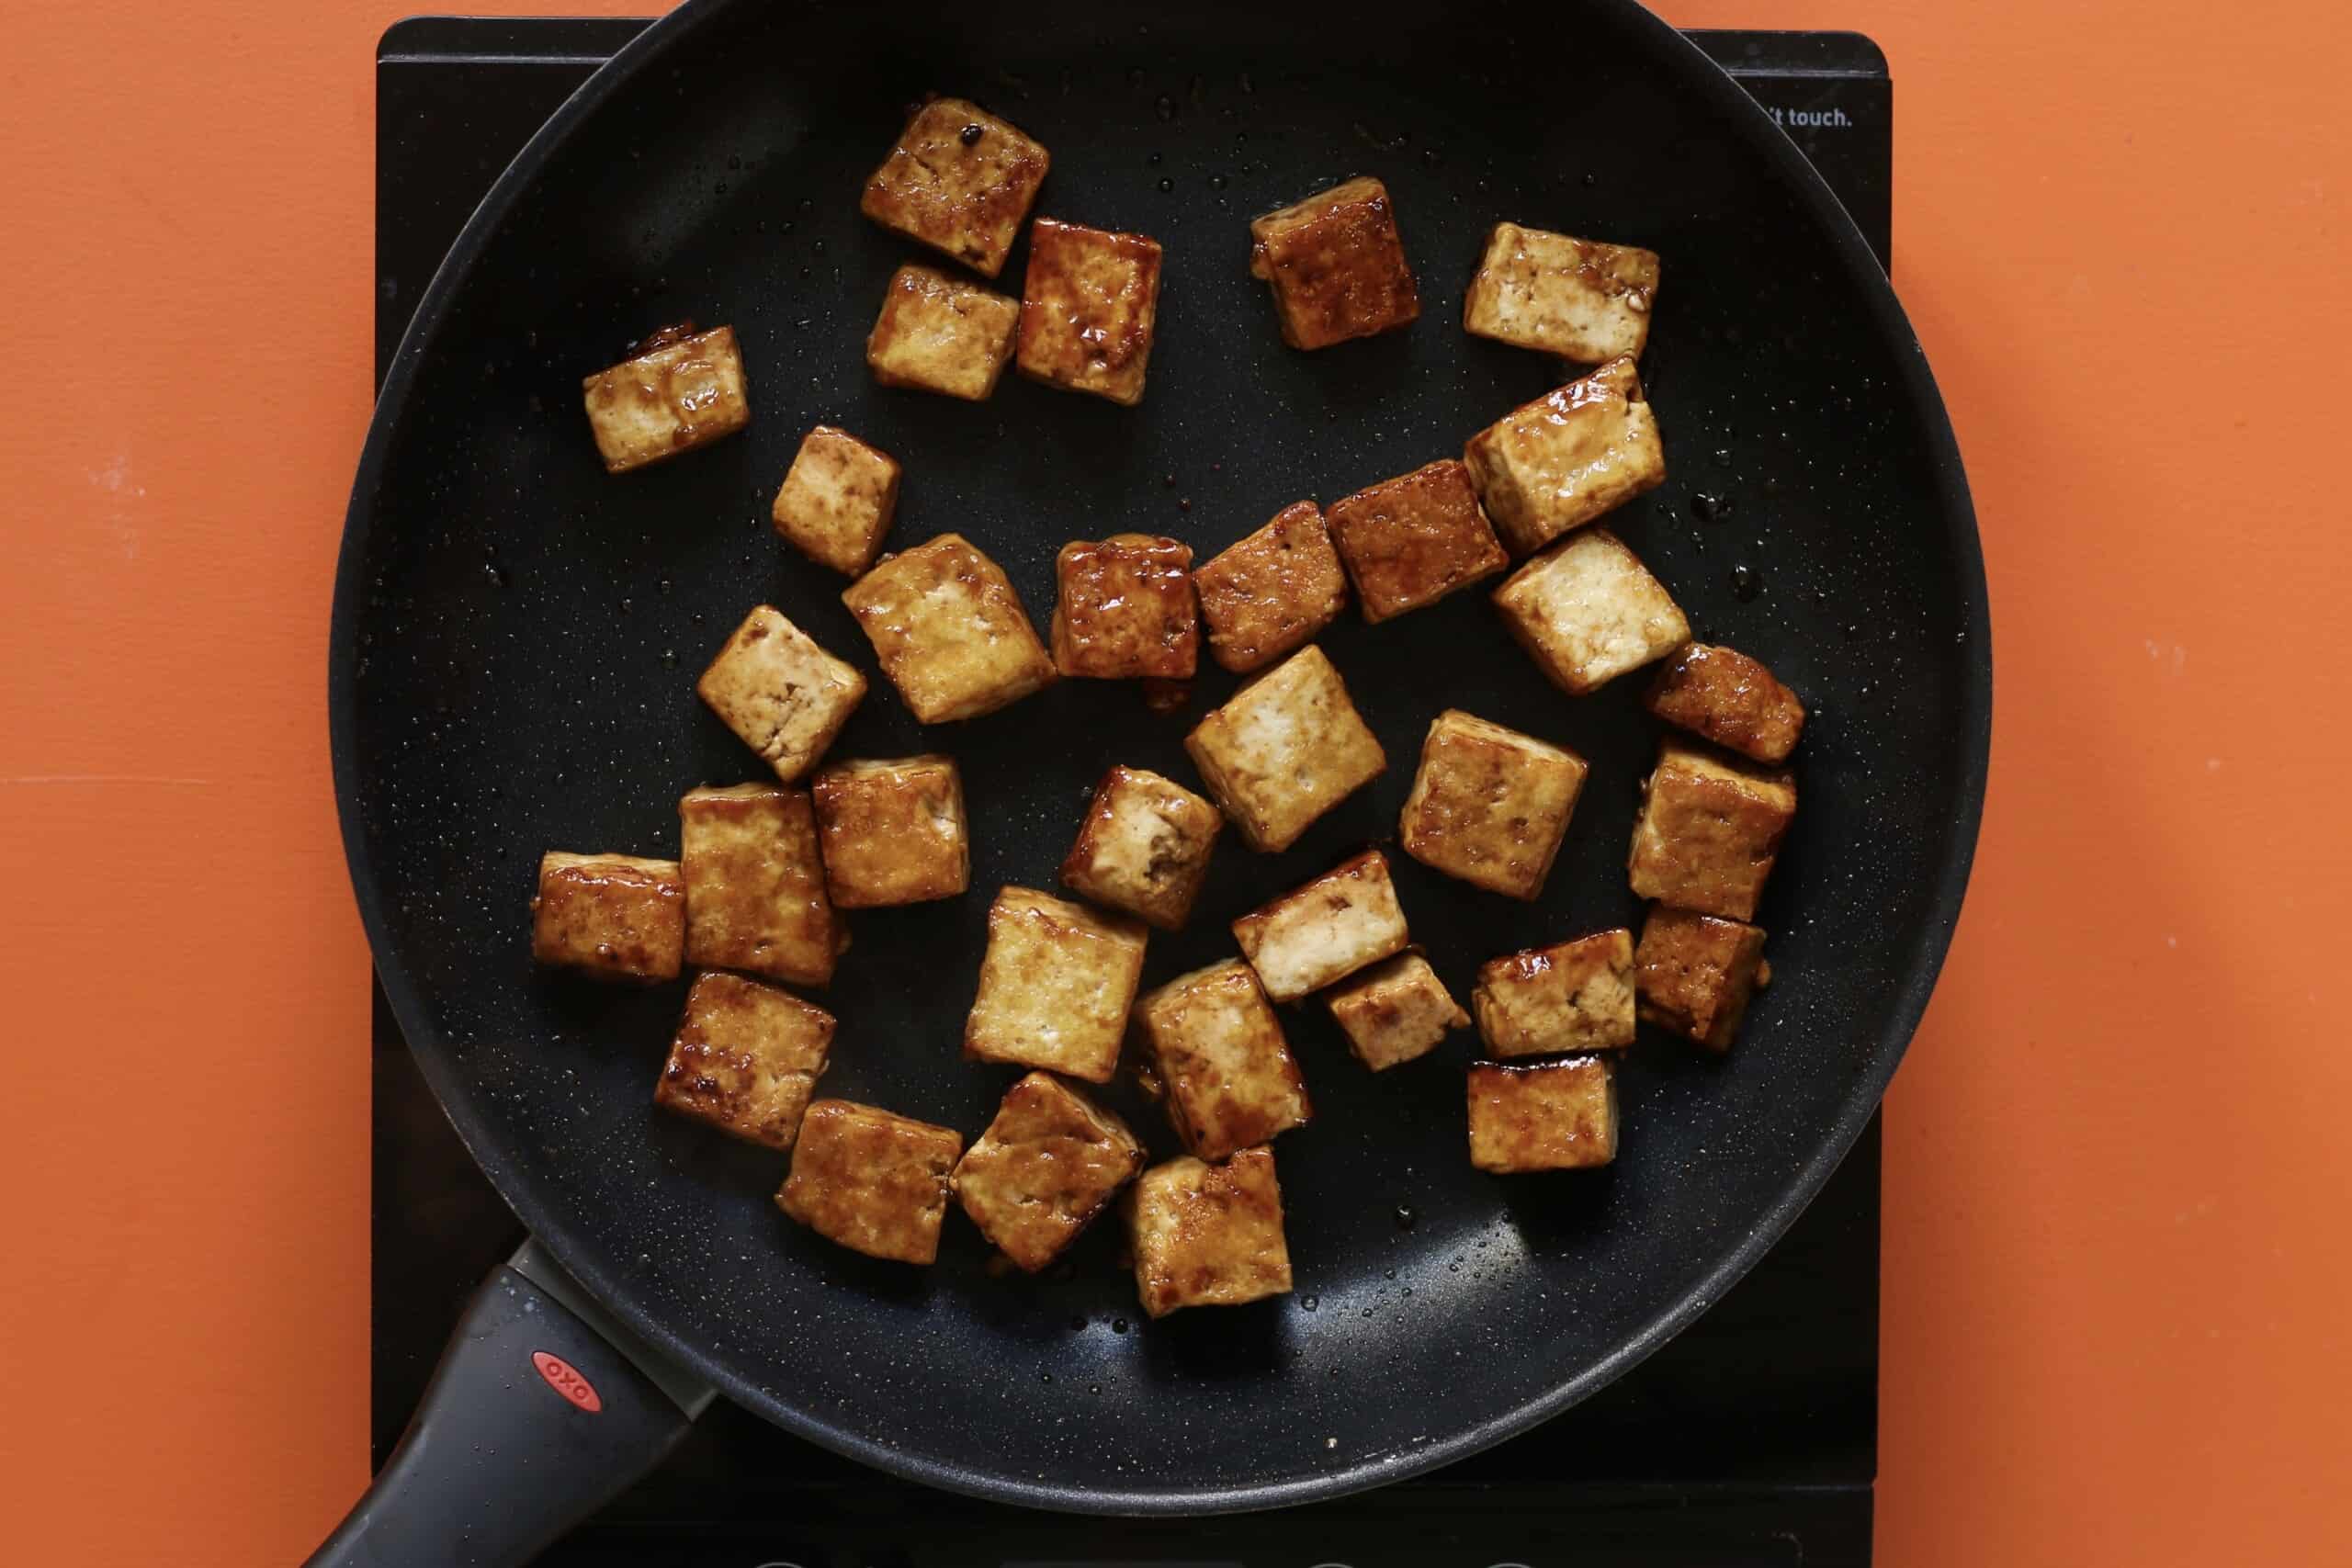 Golden browned tofu cubes in frying pan on stove on an orange background.